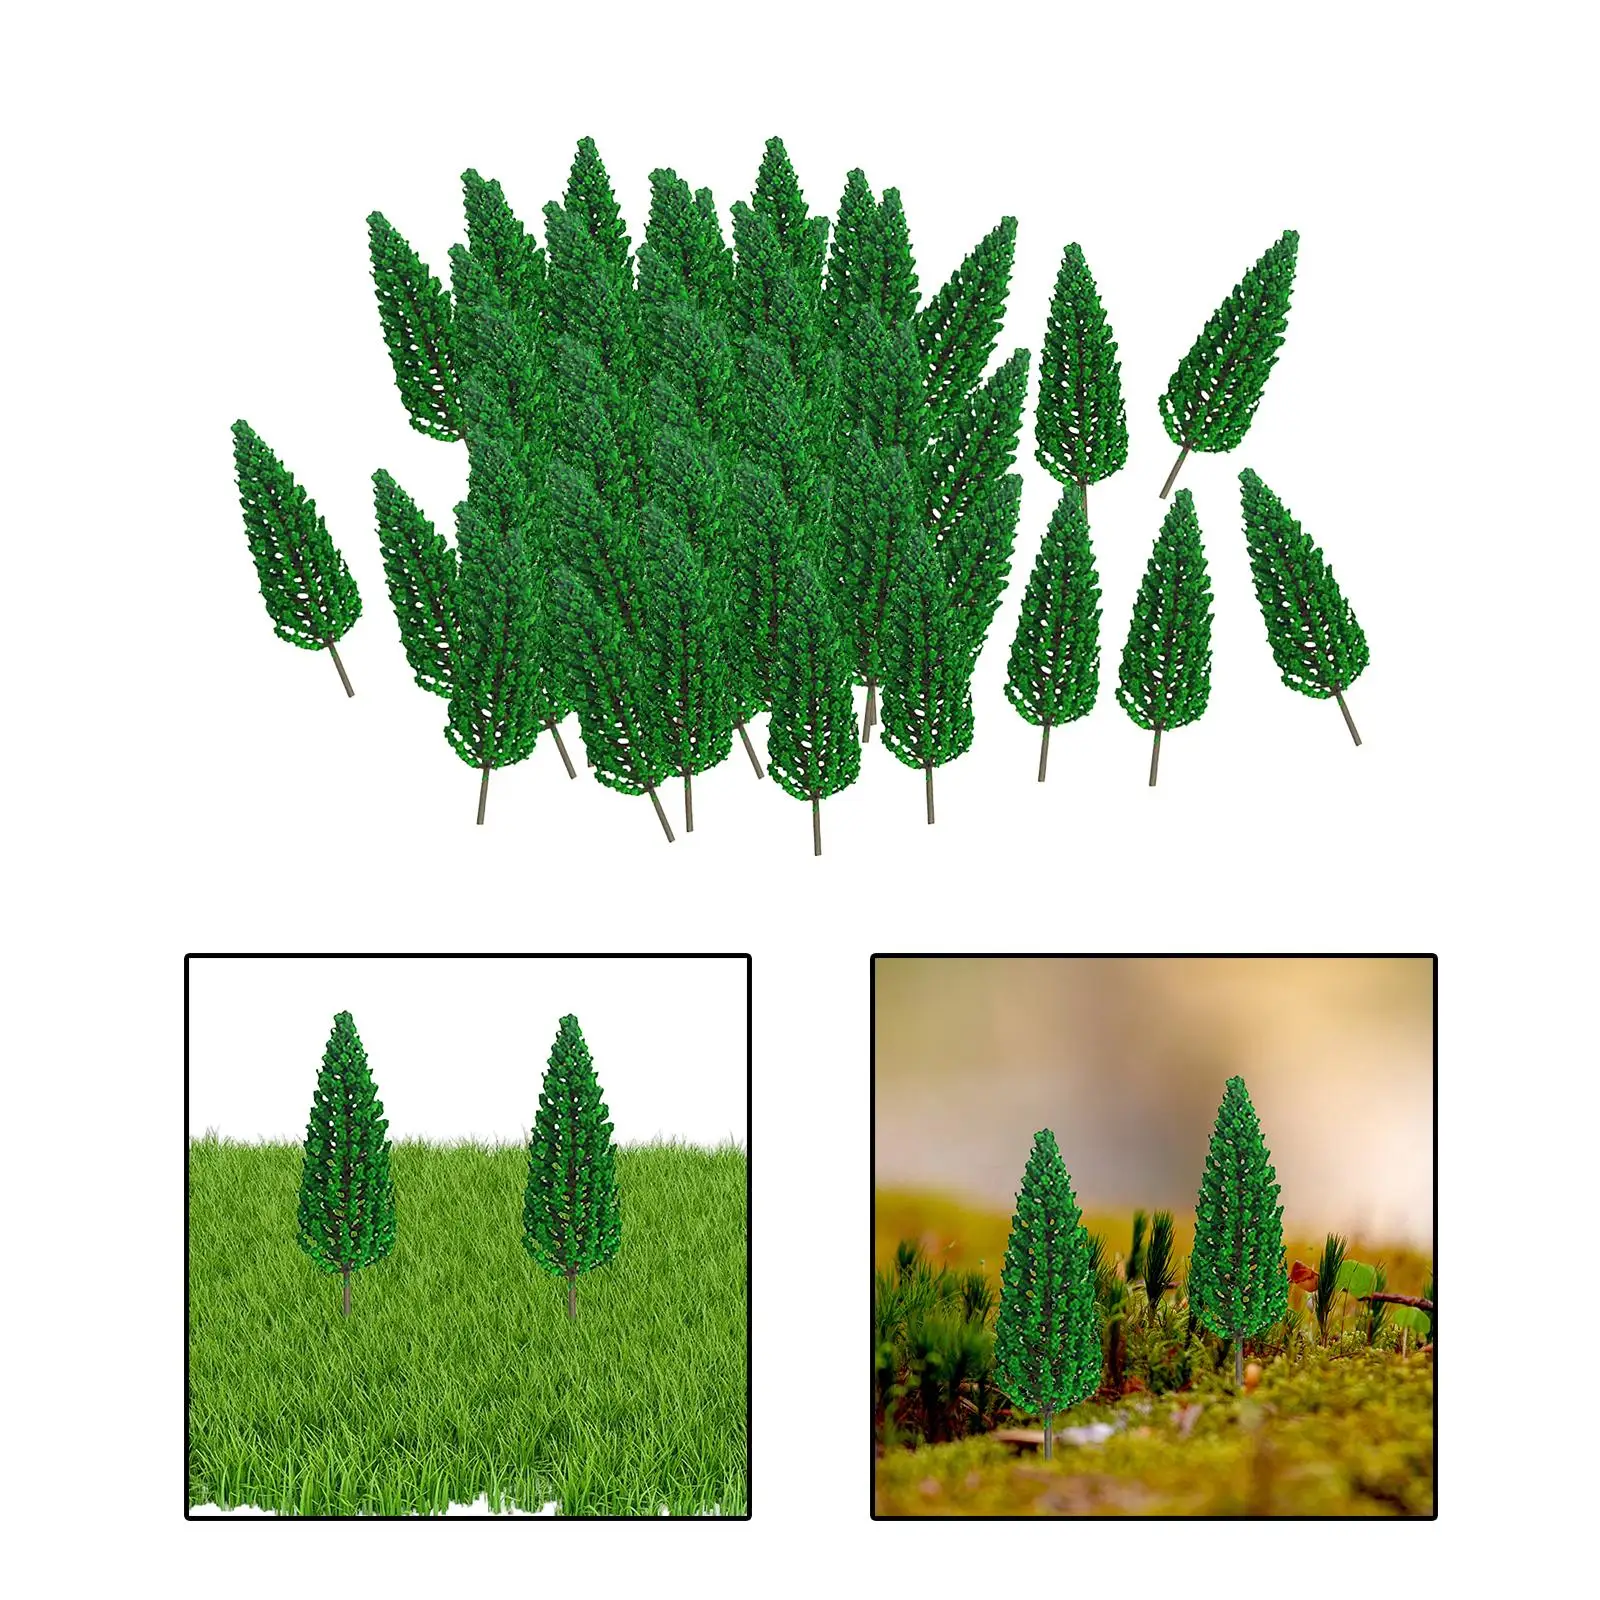 70 Pieces Model Trees 1/300 Scale Train Scenery Architecture Trees Miniature Landscape Trees for DIY Crafts Scenery Accessories